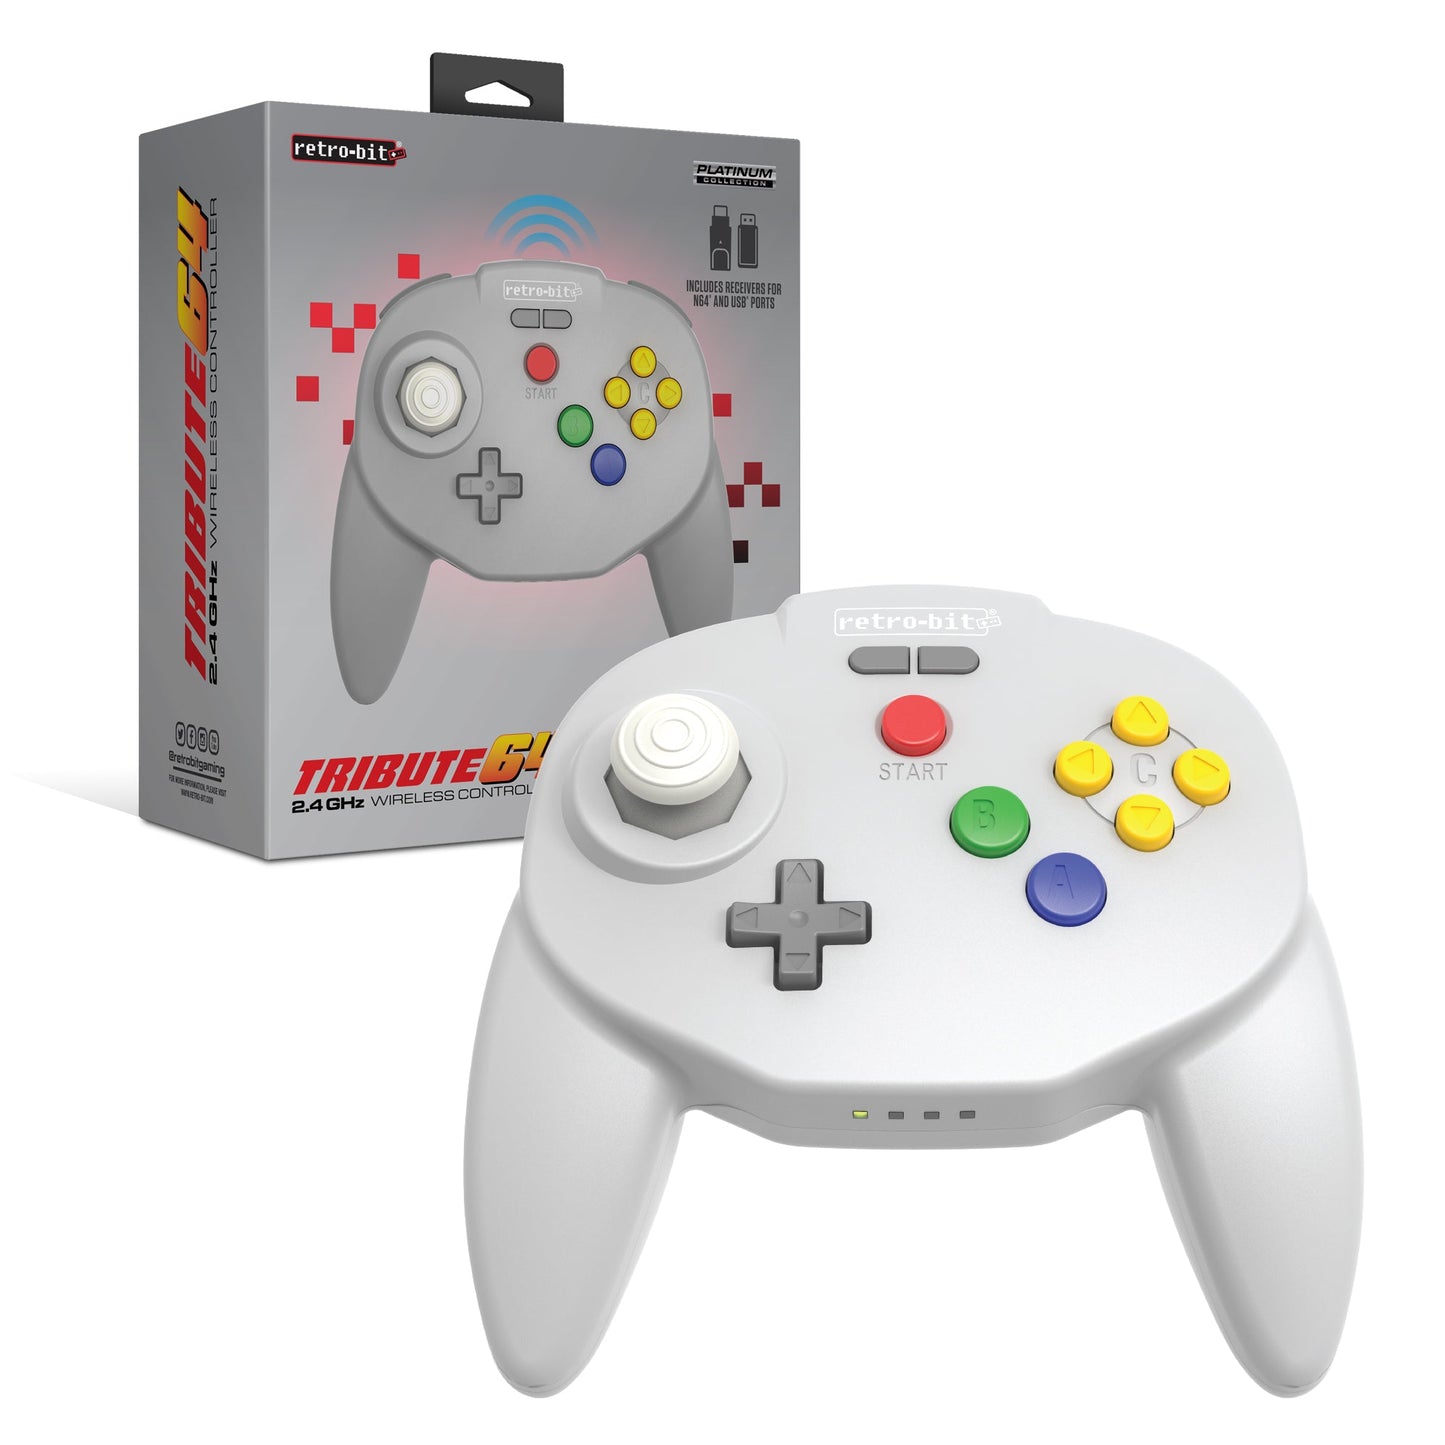 Tribute64 2.4GHz Wireless Controller - Classic Grey - CastleMania Games